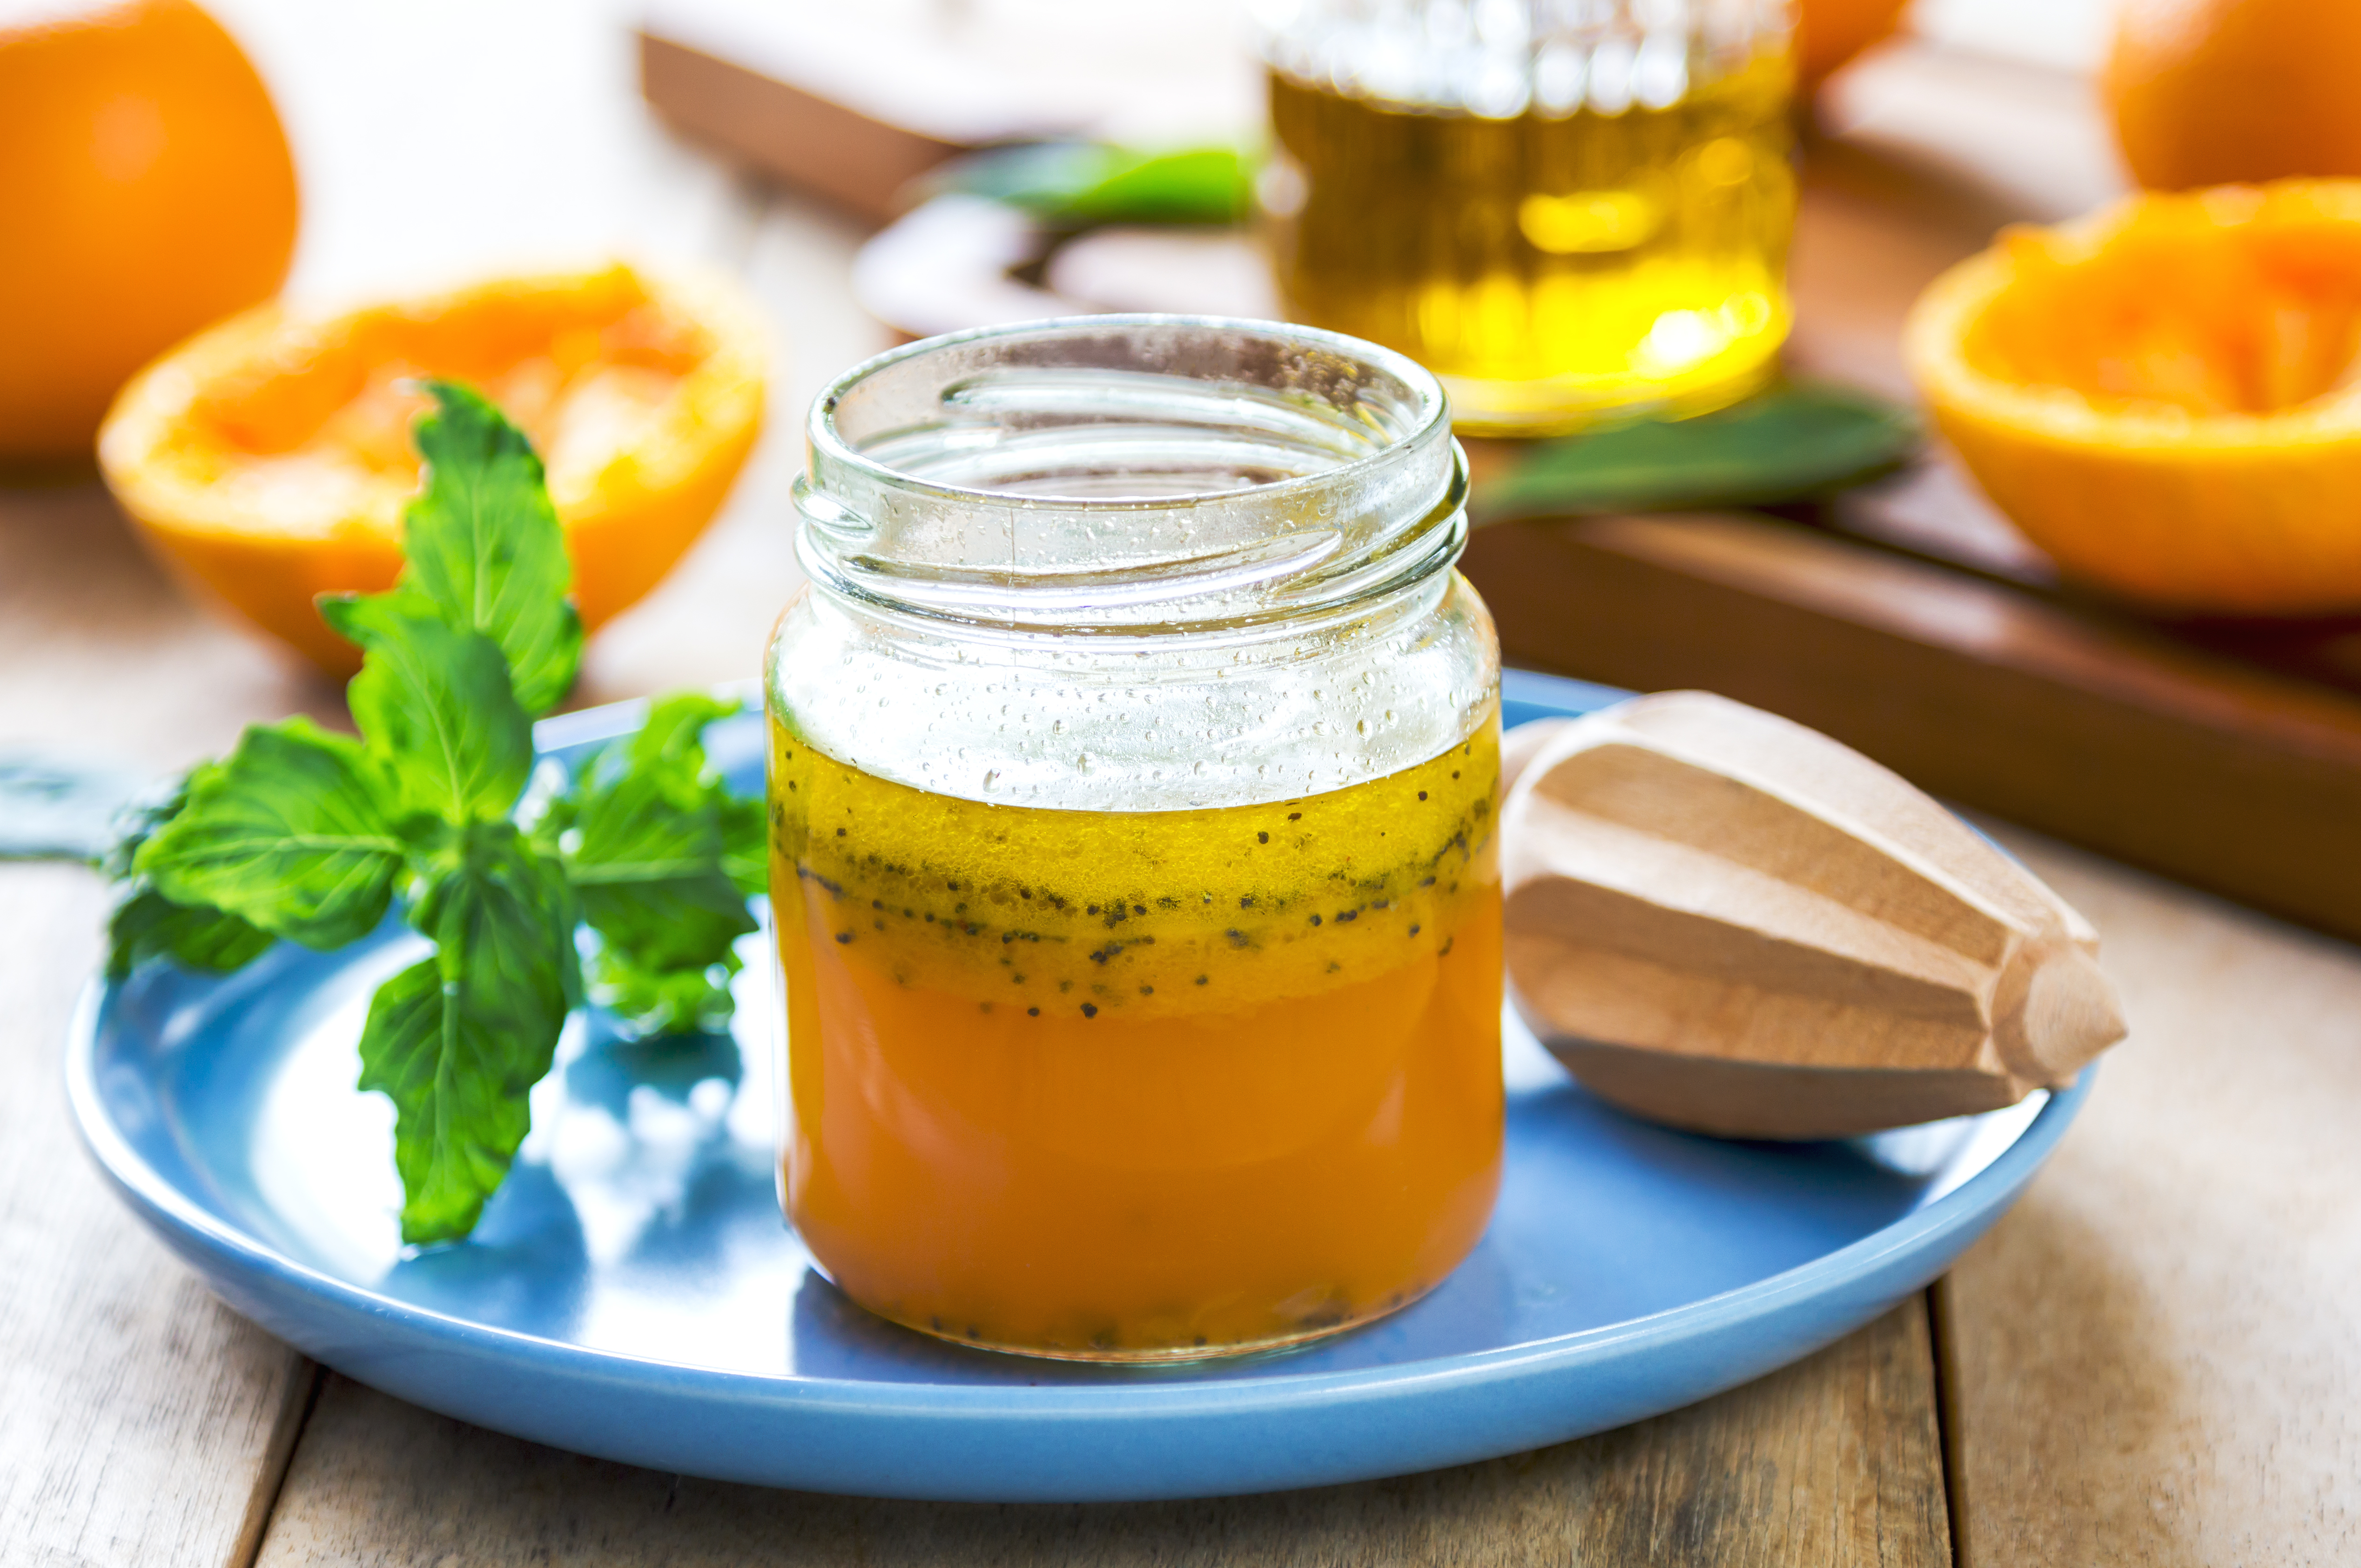 A jar of orange colored salad dressing next to a sprig of a green herb and a wooden orange juicer on top of a blue plate